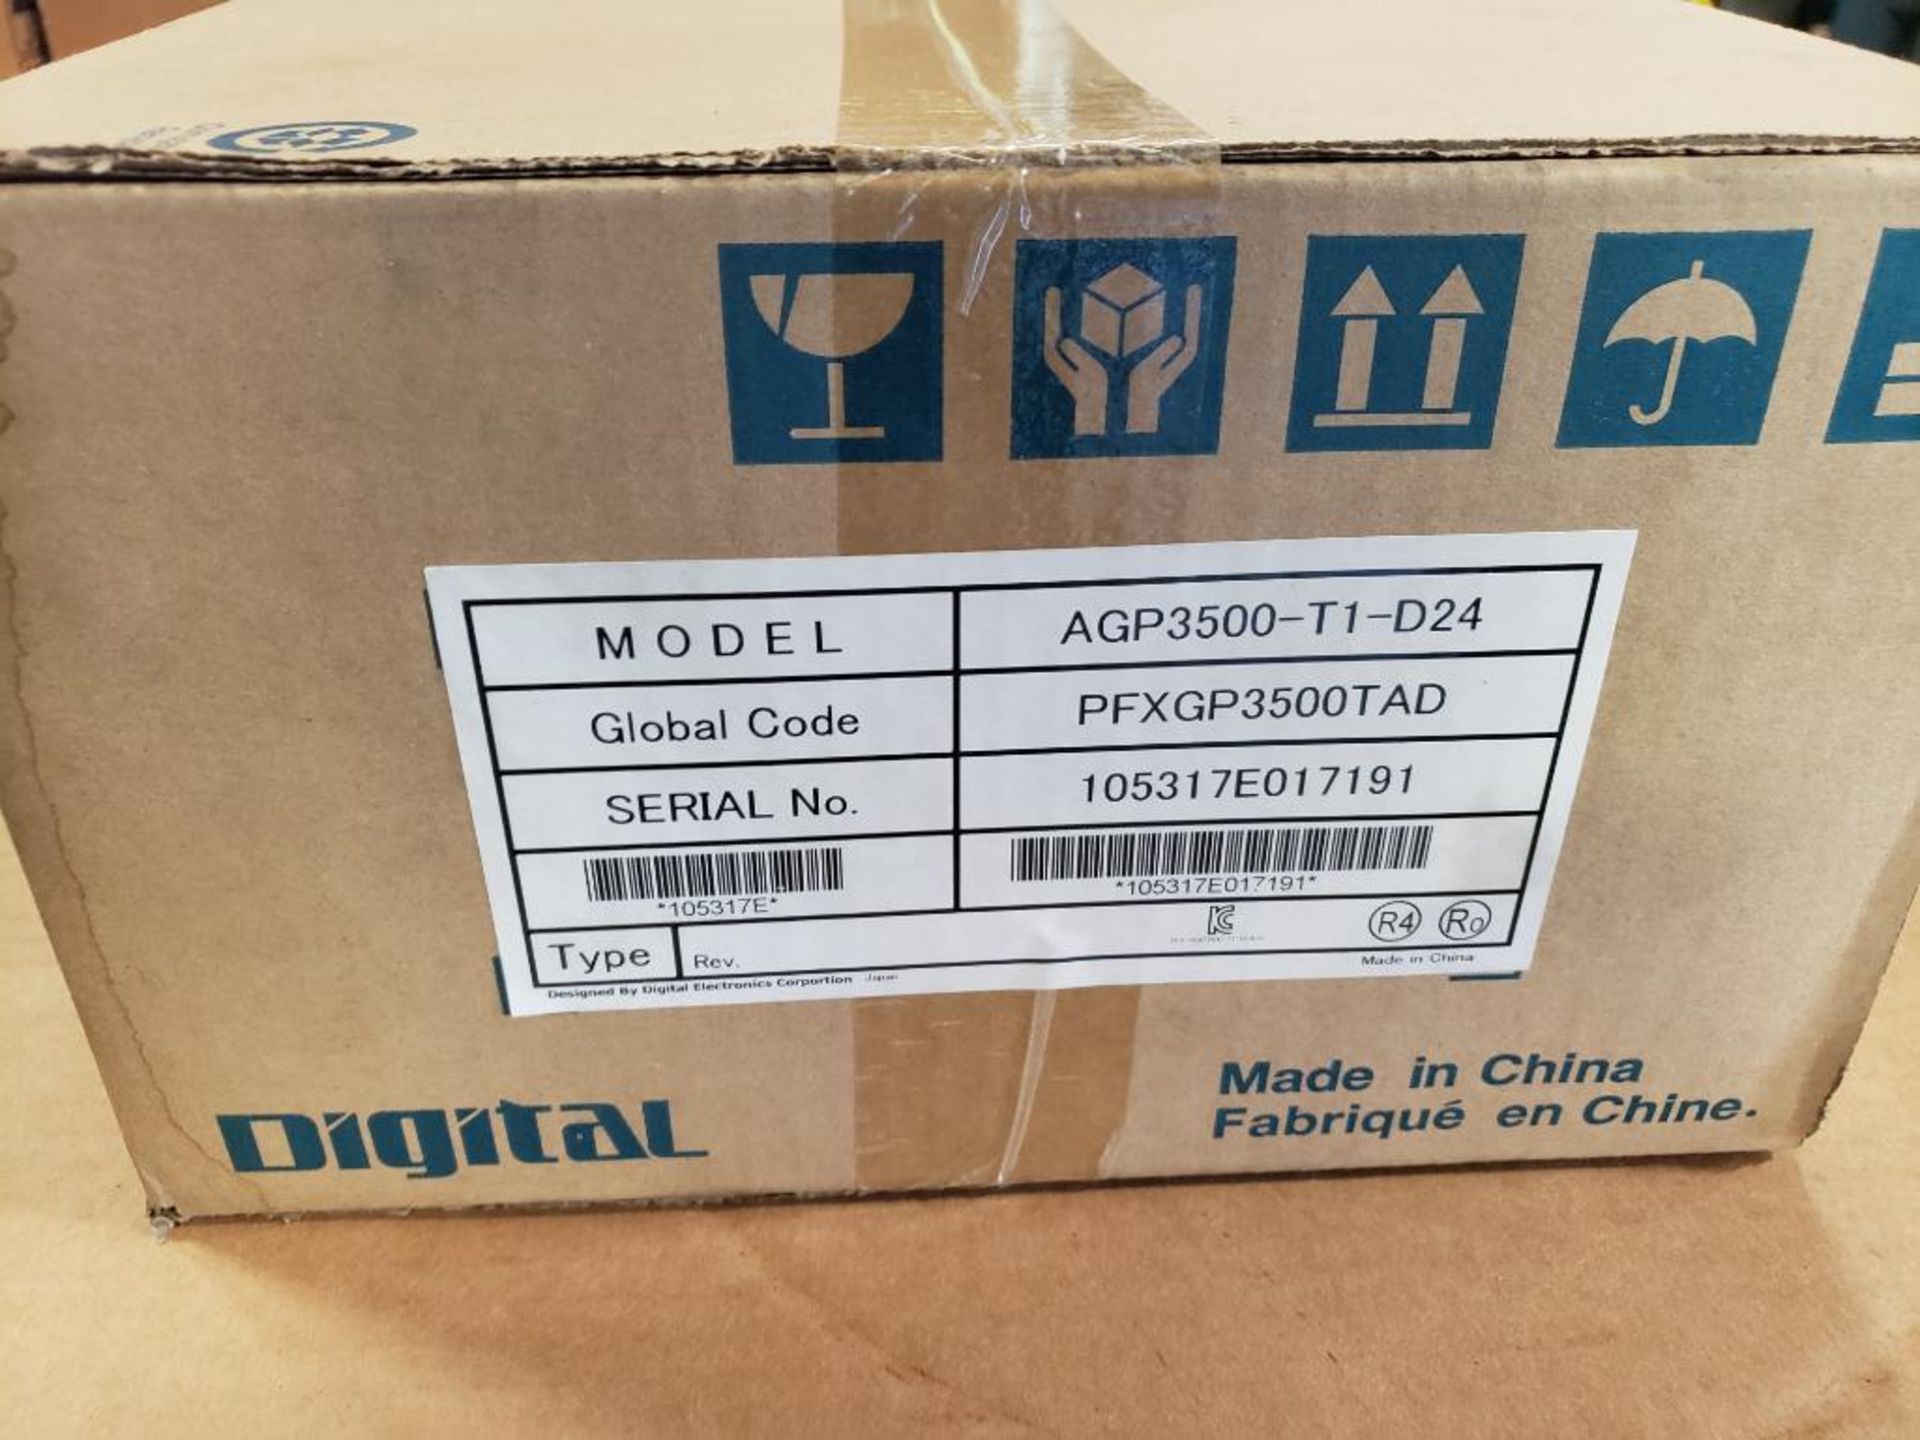 Digital Electronics Corp Pro-Face AGP3500-T1-D24 operator interface panel. New in box. - Image 3 of 6